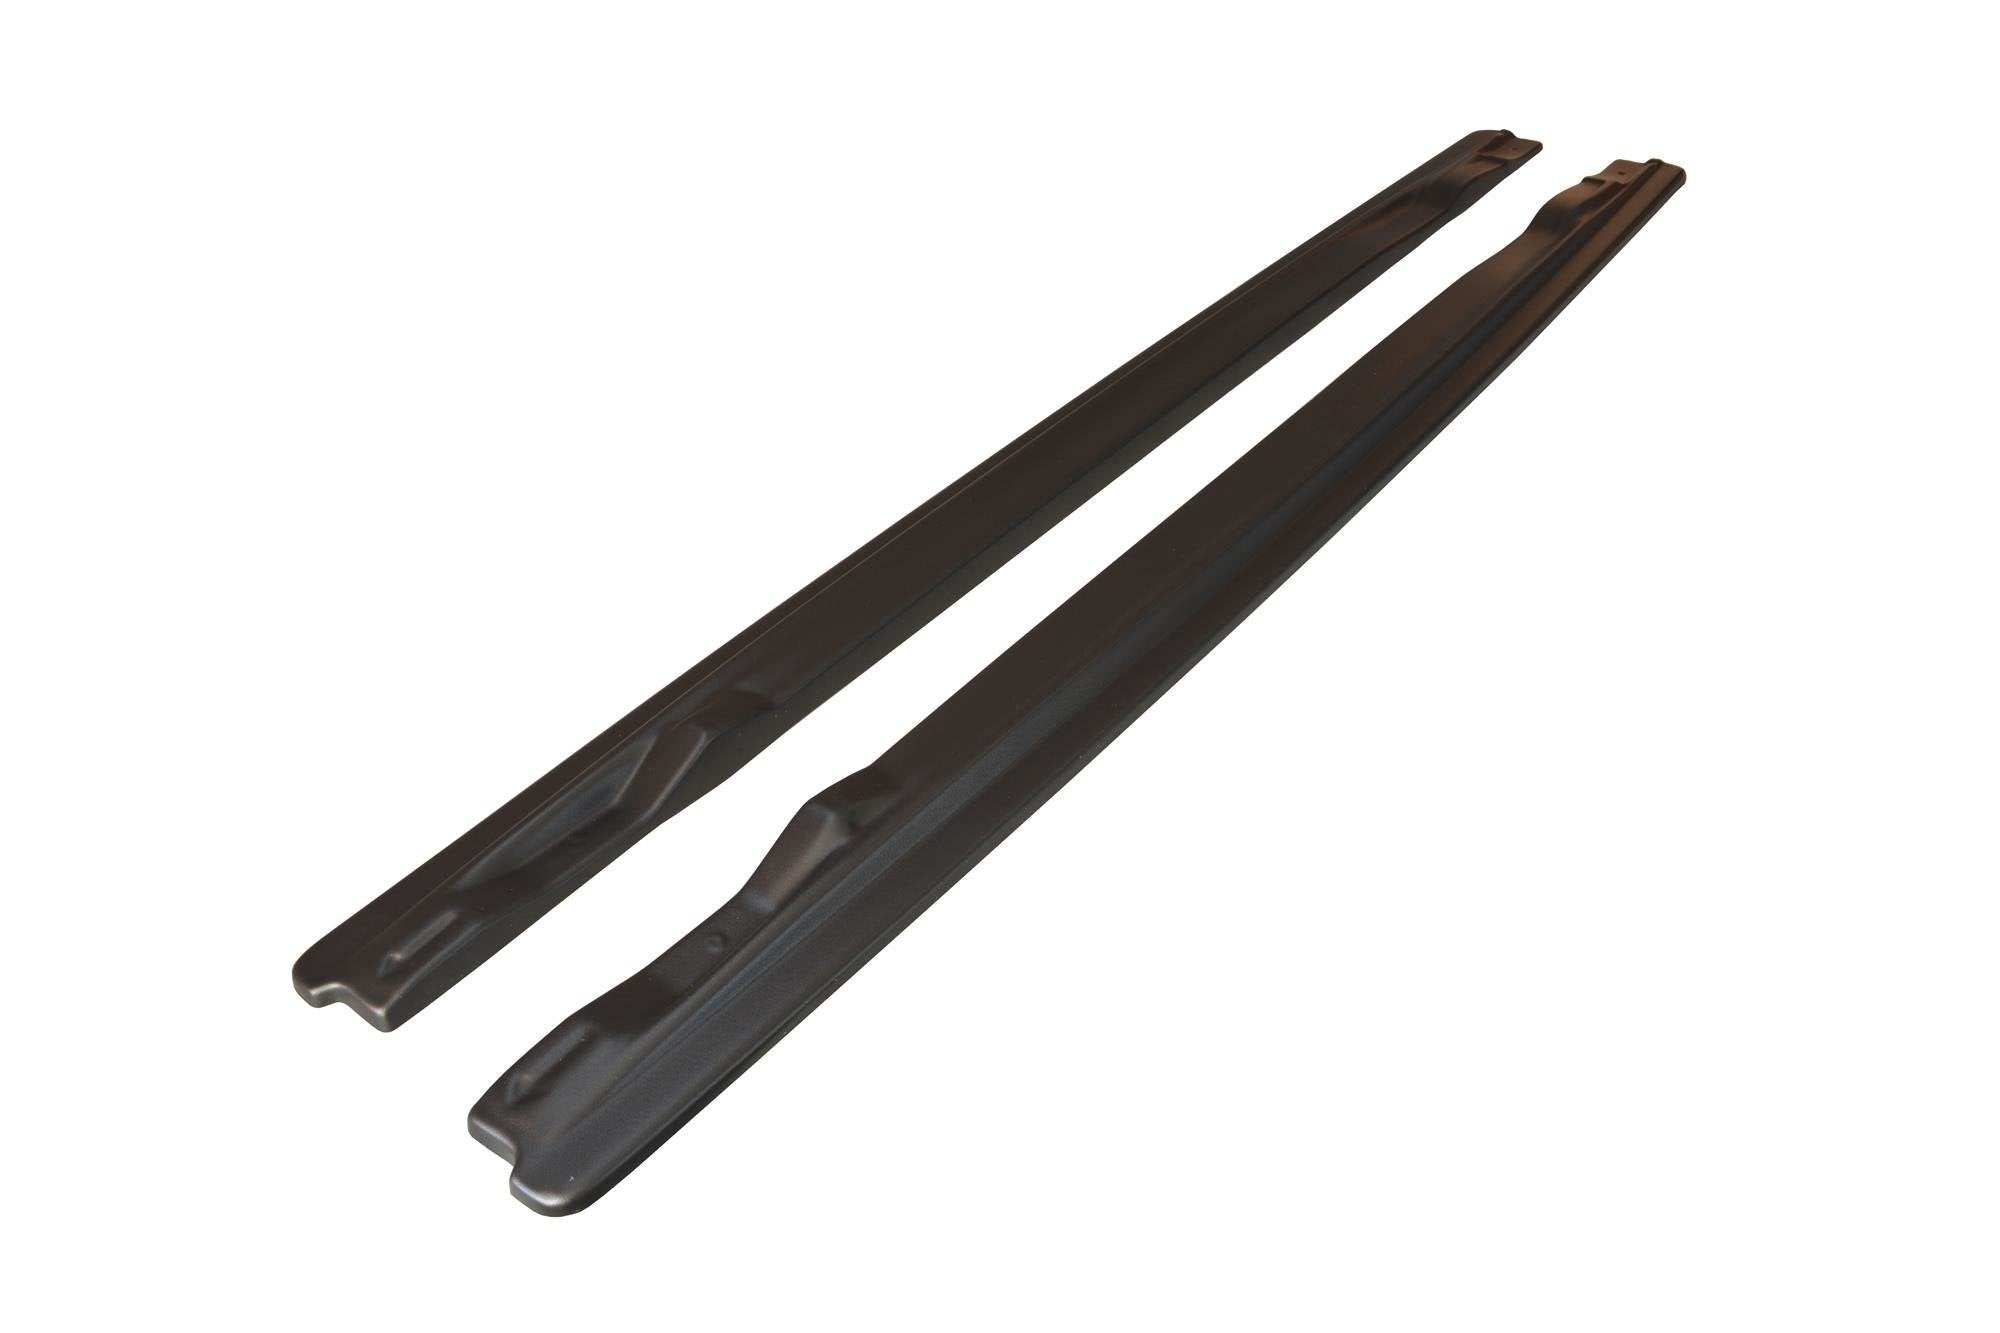 SIDE SKIRTS DIFFUSERS AUDI A6 C6 S-LINE (PREFACE/FACELIFT)